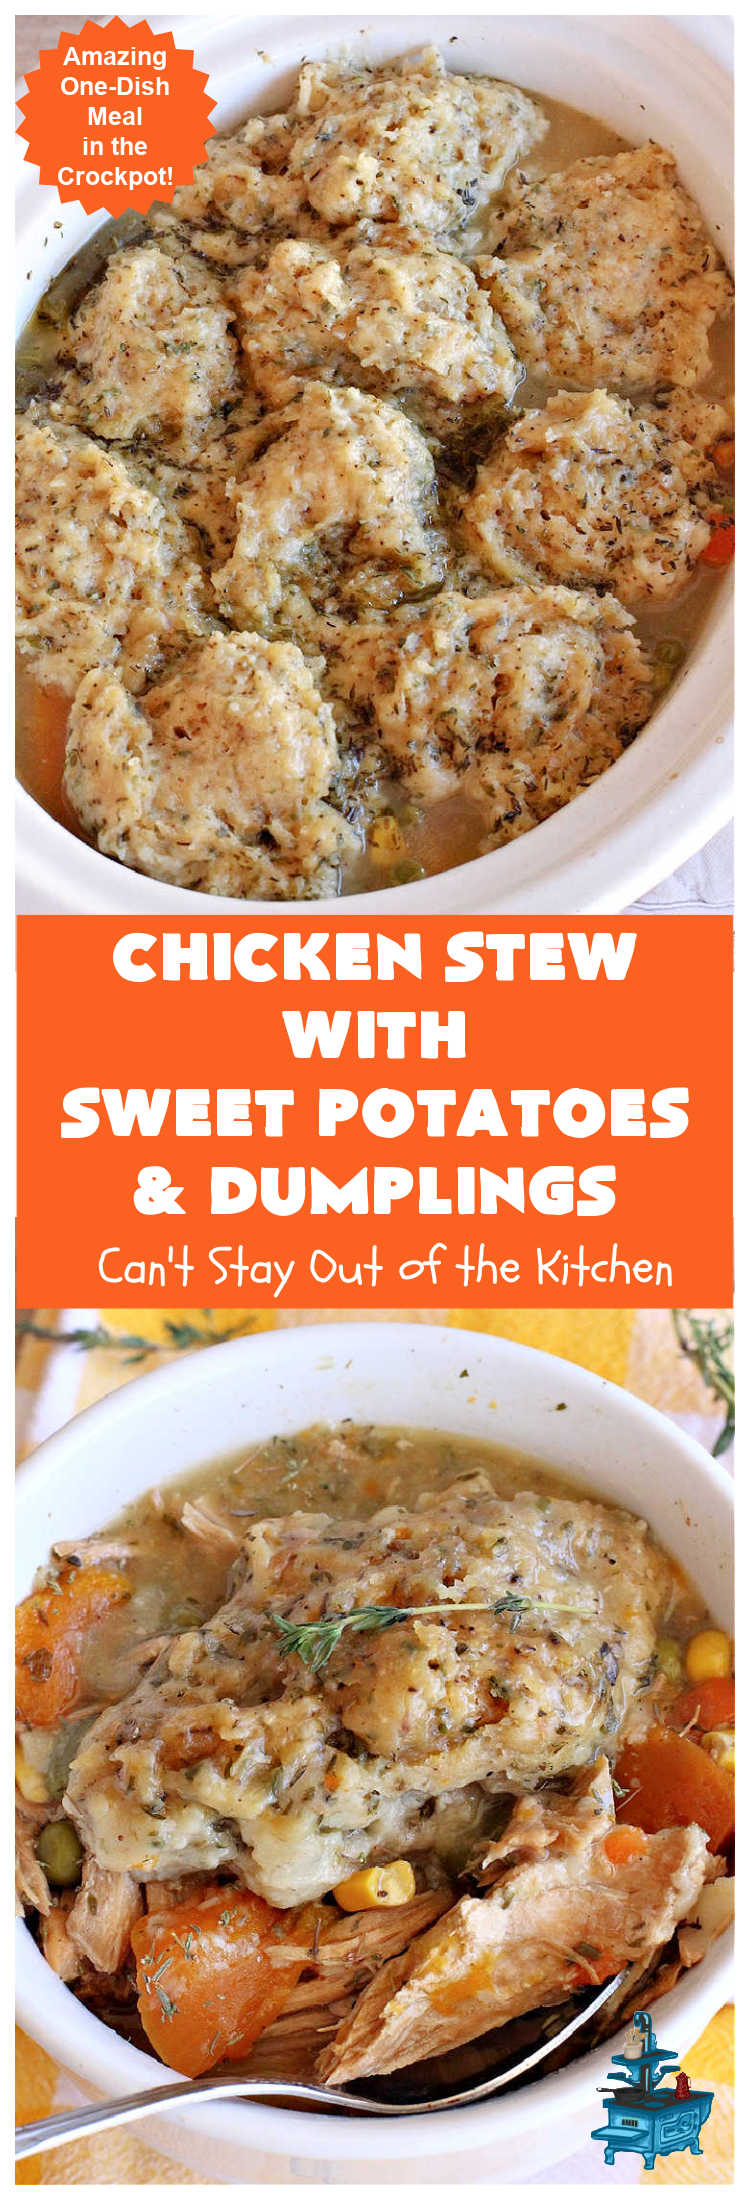 Chicken Stew with Sweet Potatoes & Dumplings | Can't Stay Out of the Kitchen